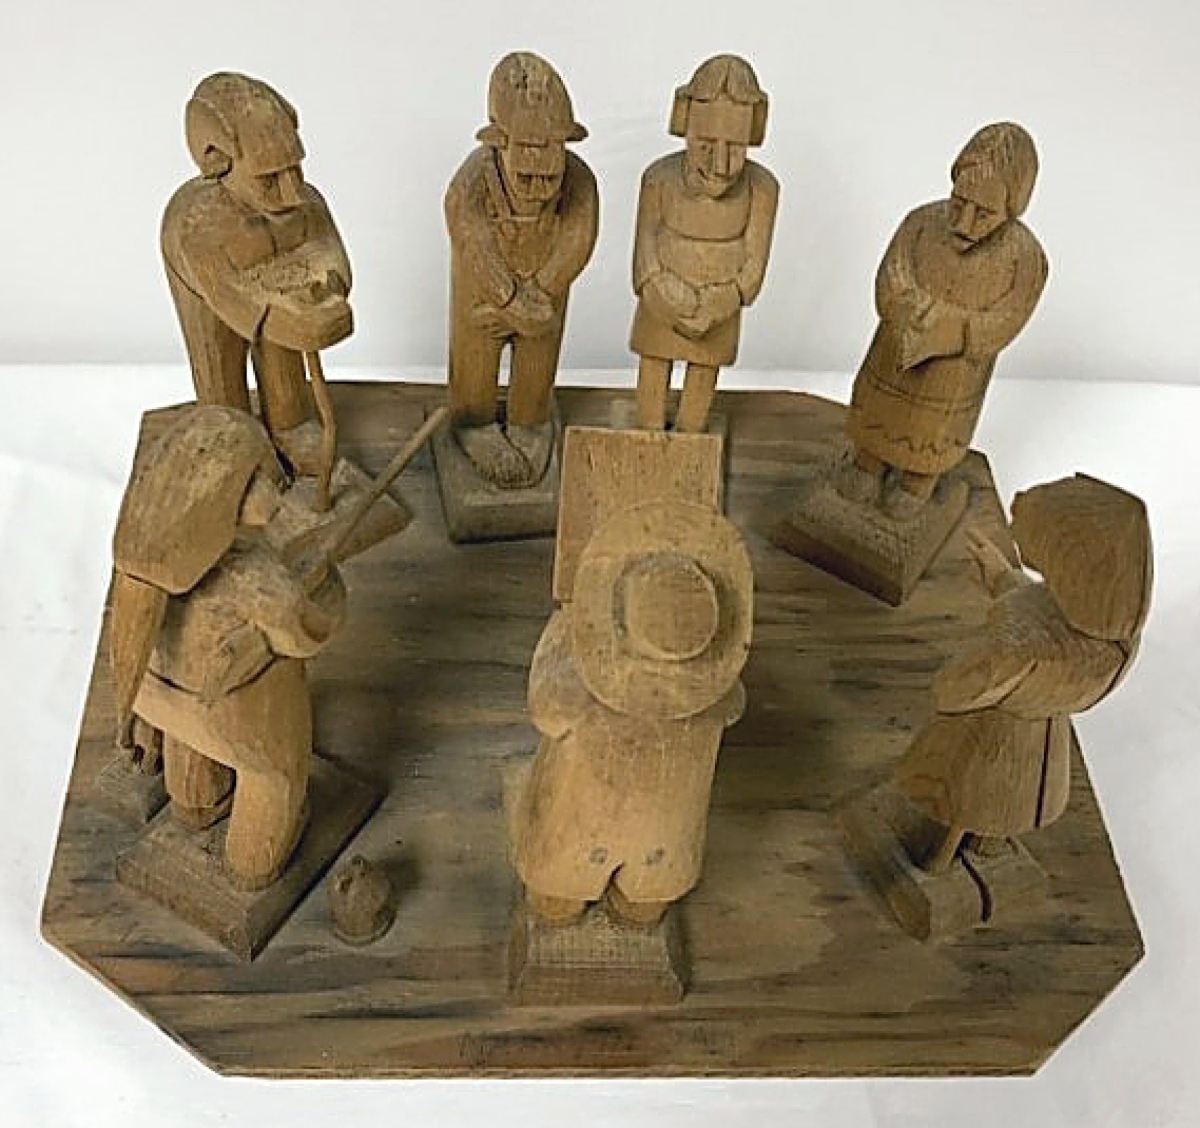 An unusual item with Jim Wierzba of For The Shelf, Mequon, Wis., was this folk art carving of a shotgun wedding. Dating to the 1930s and probably from the Appalachian area of Kentucky based on the figures and clothing, it measured 6½ inches tall and had been priced at $750.